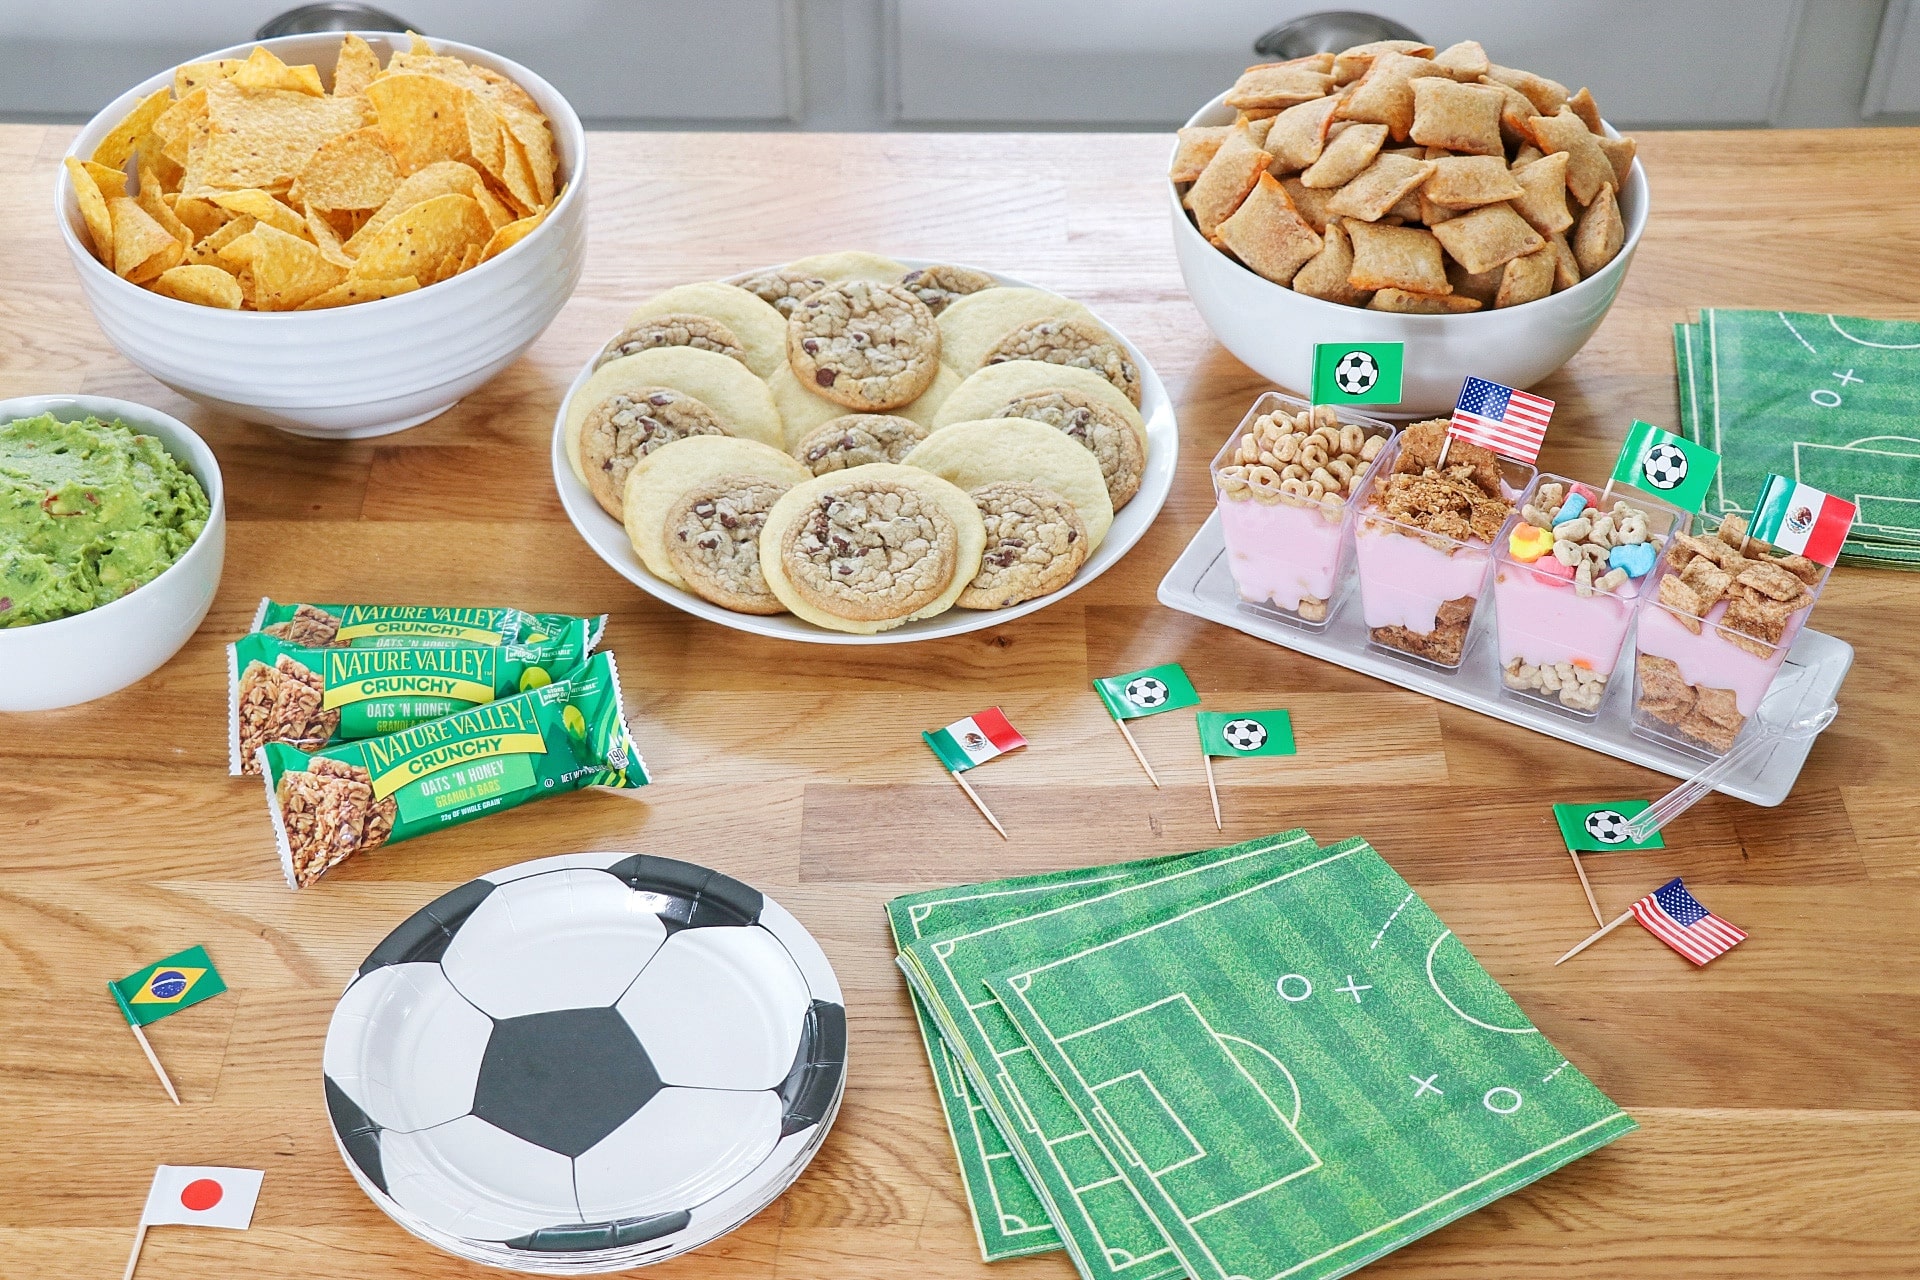 soccer party ideas: food spread for a soccer watch party or end of season soccer team party